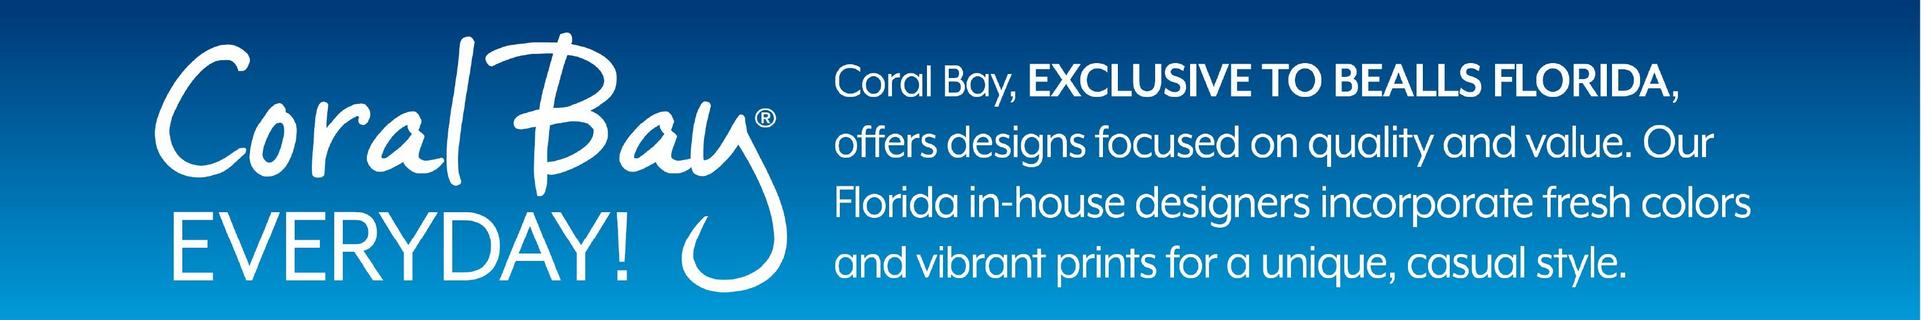 Coral Bay Everyday!